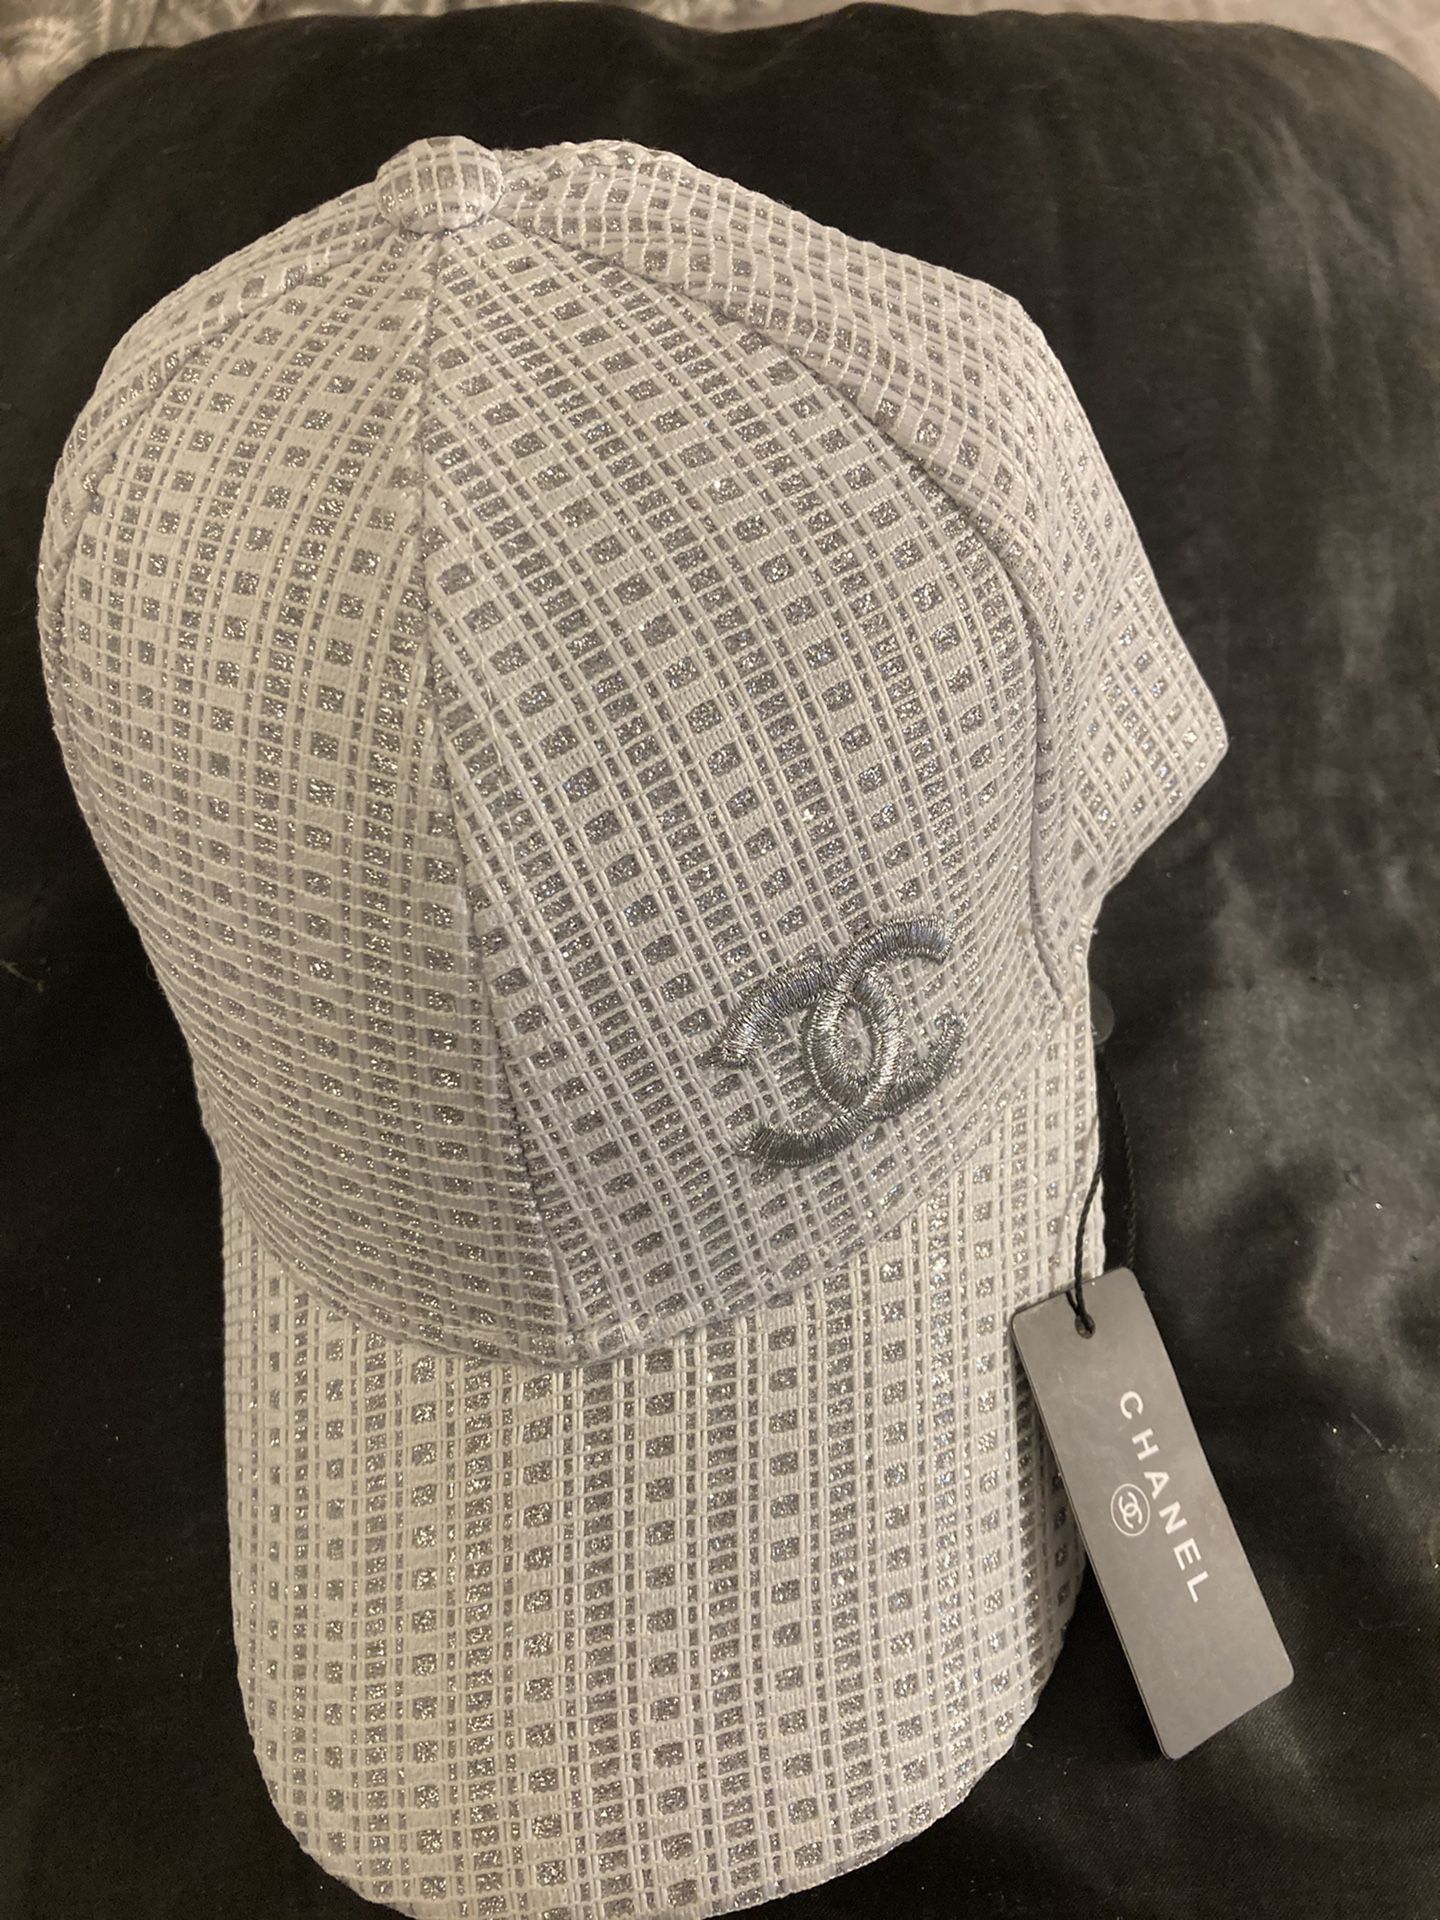 Nwt! Women’s Adjustable Chanel Baseball Hat. BagWhite Accented with  Shimmering Silver Embroidery. Lightweight and comfortable. Includes retail  bag. (